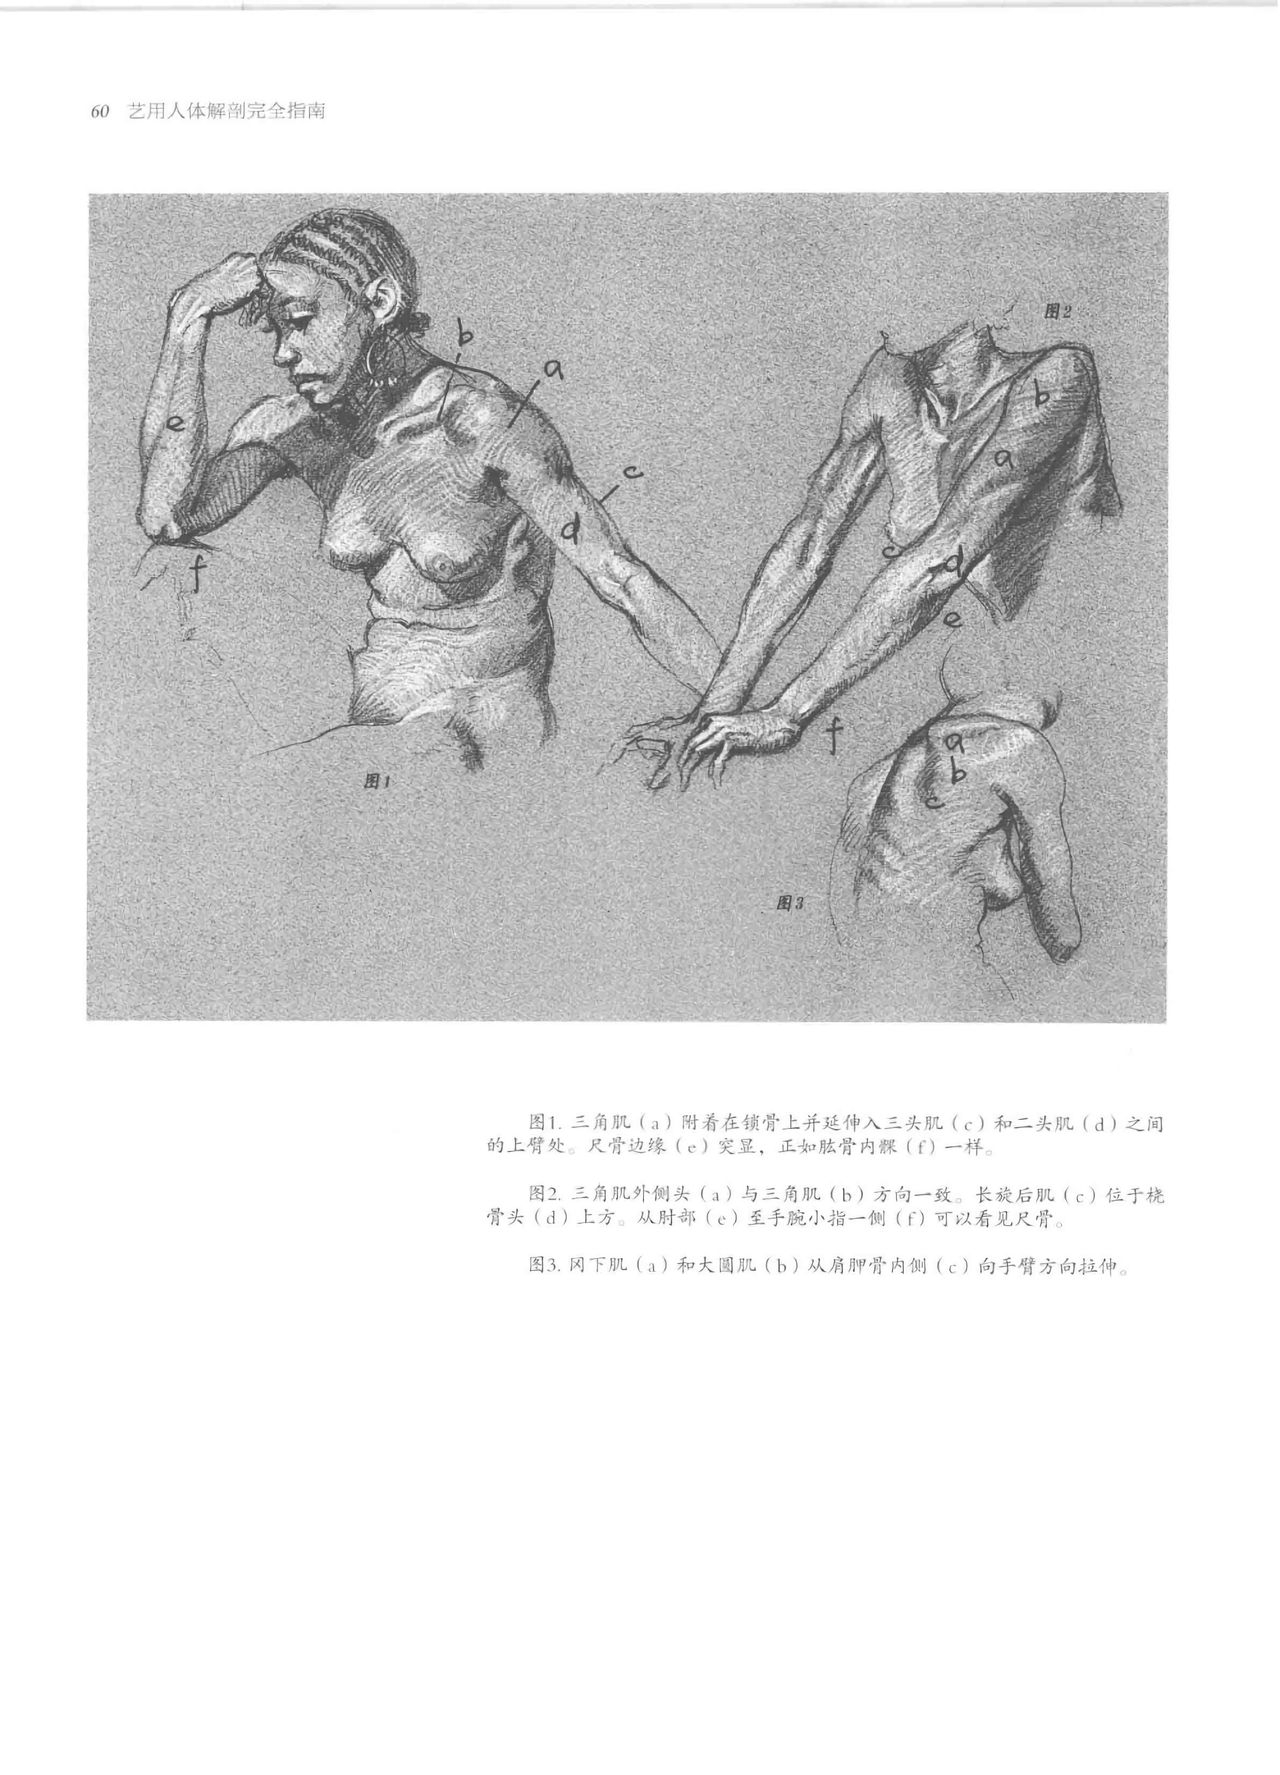 Anatomy-A Complete Guide for Artists - Joseph Sheppard [Chinese] 60